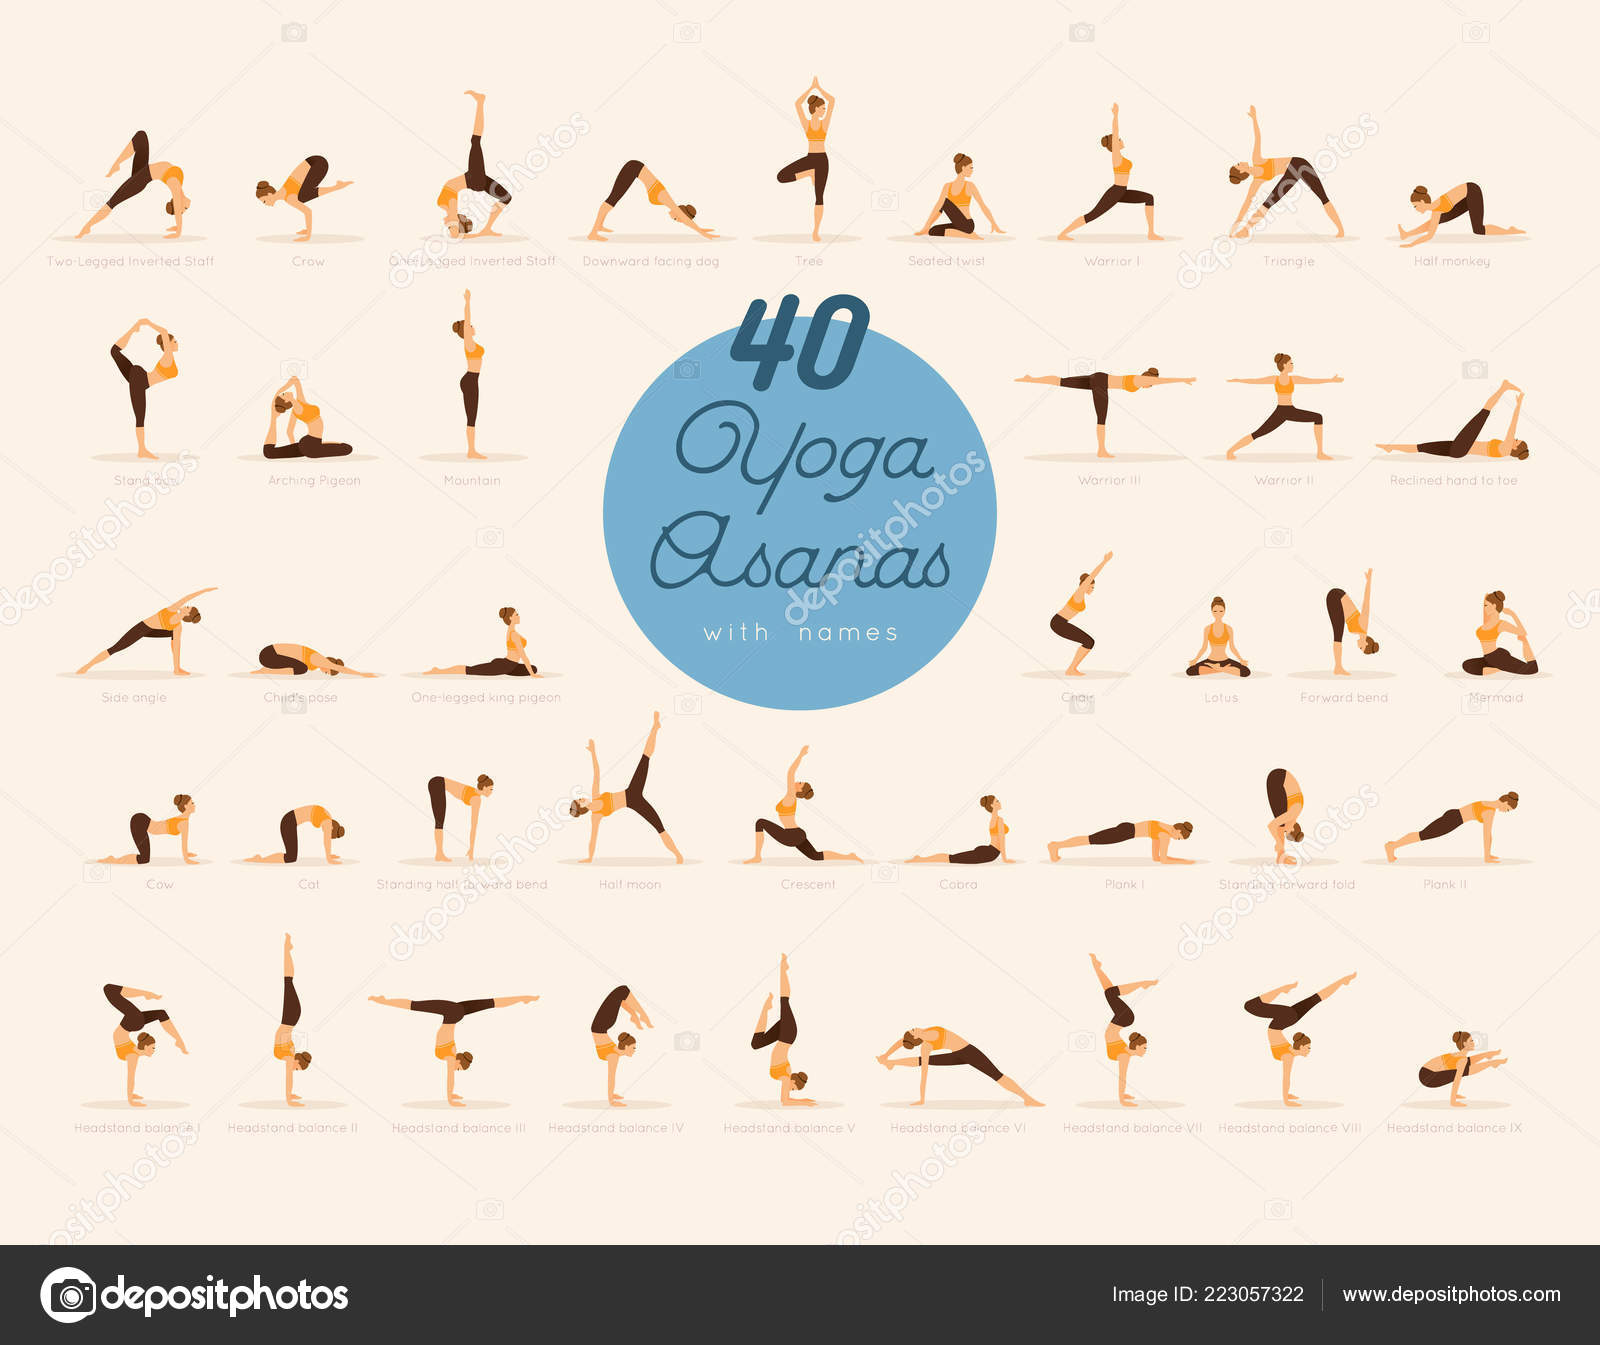 9 Yoga Asanas For Beginners, Intermediate, & Advanced Stages